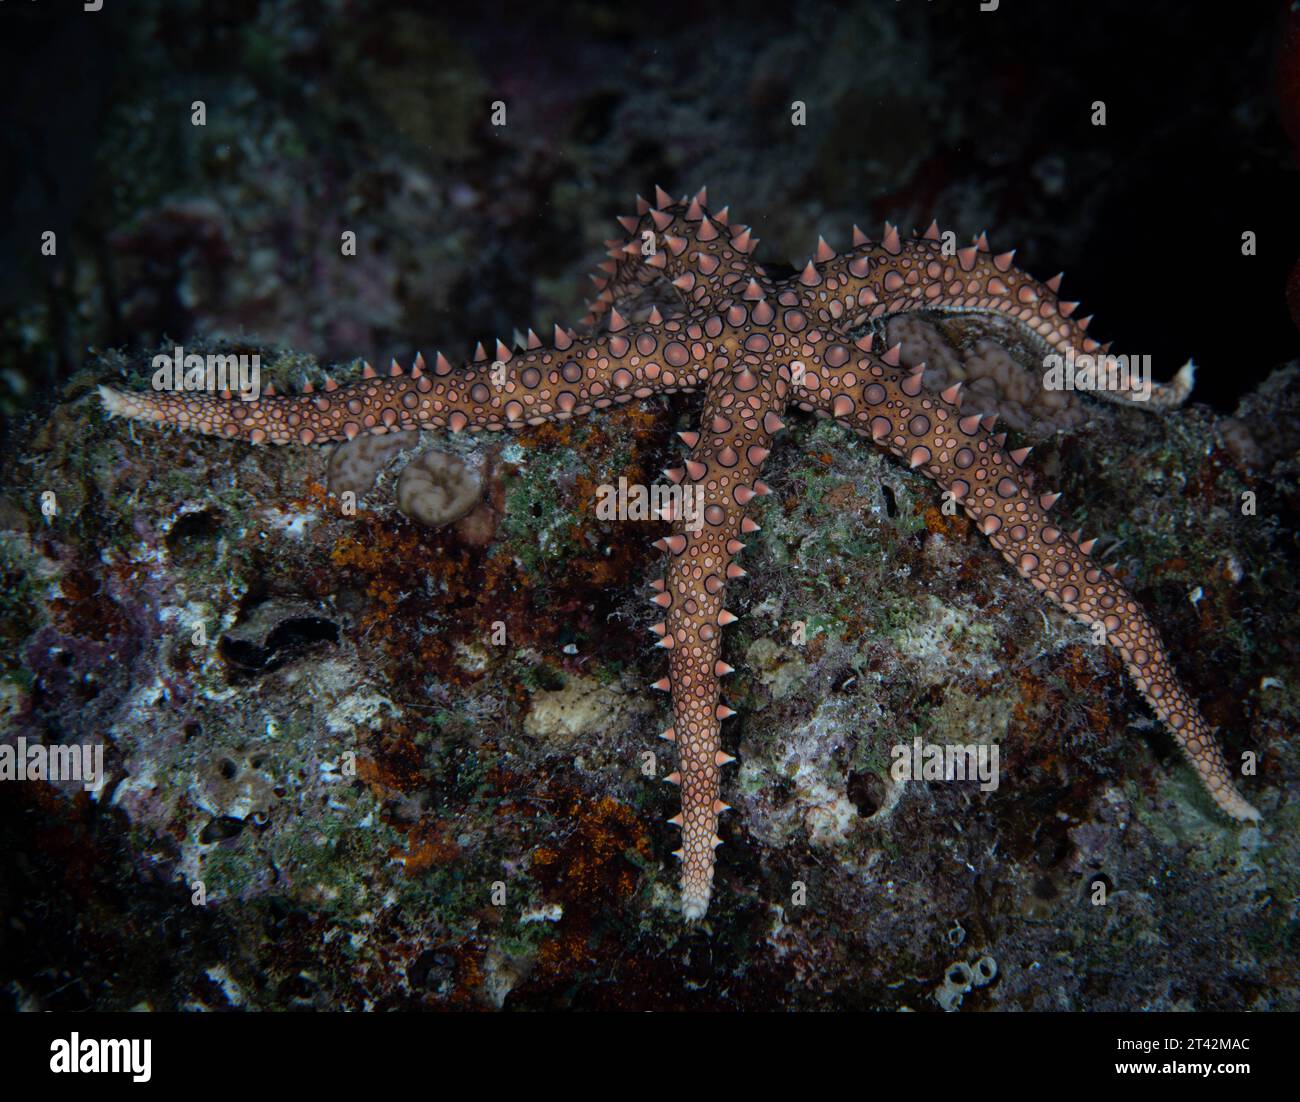 A vibrant  giant sea star (Pisaster giganteus) atop a jagged rock in a tranquil aquatic environment Stock Photo